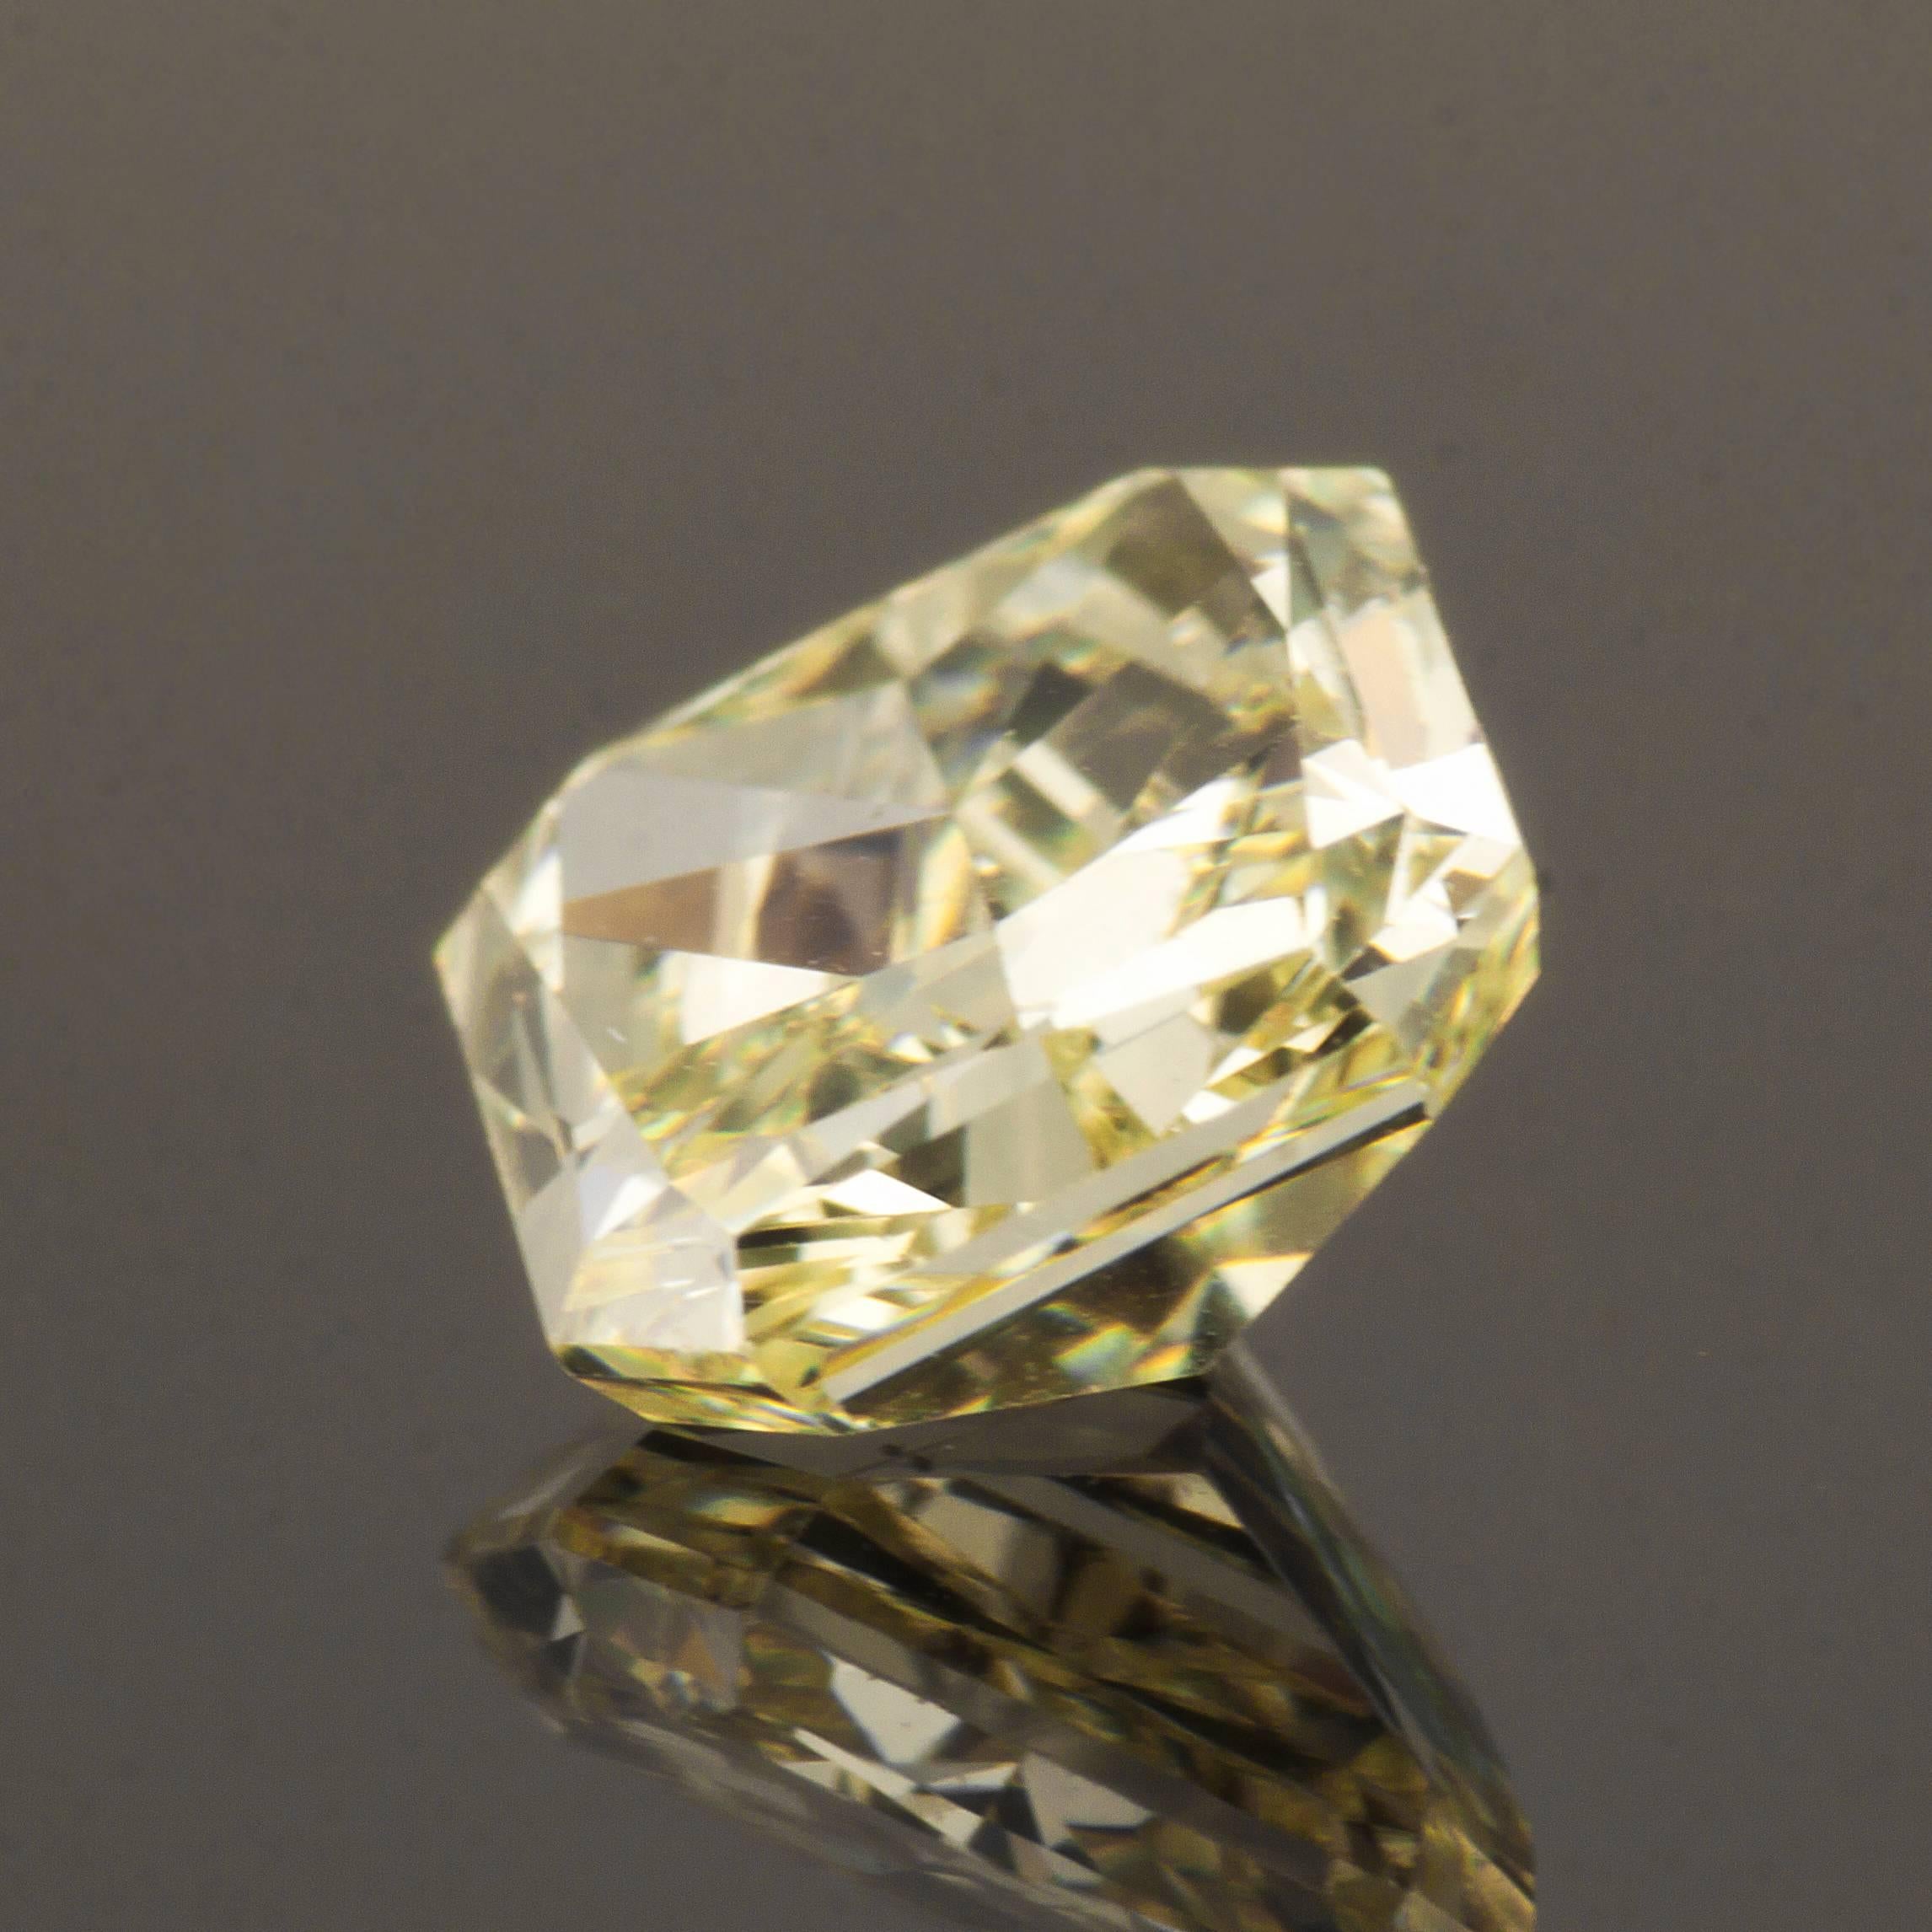 Stunning quality loose fancy yellow diamond with VS2 clarity, graded by HRD (Europe's leading authority in diamond certification). This loose diamond gives you the the opportunity to make your own one-of-a-kind engagement ring, or other jewelry